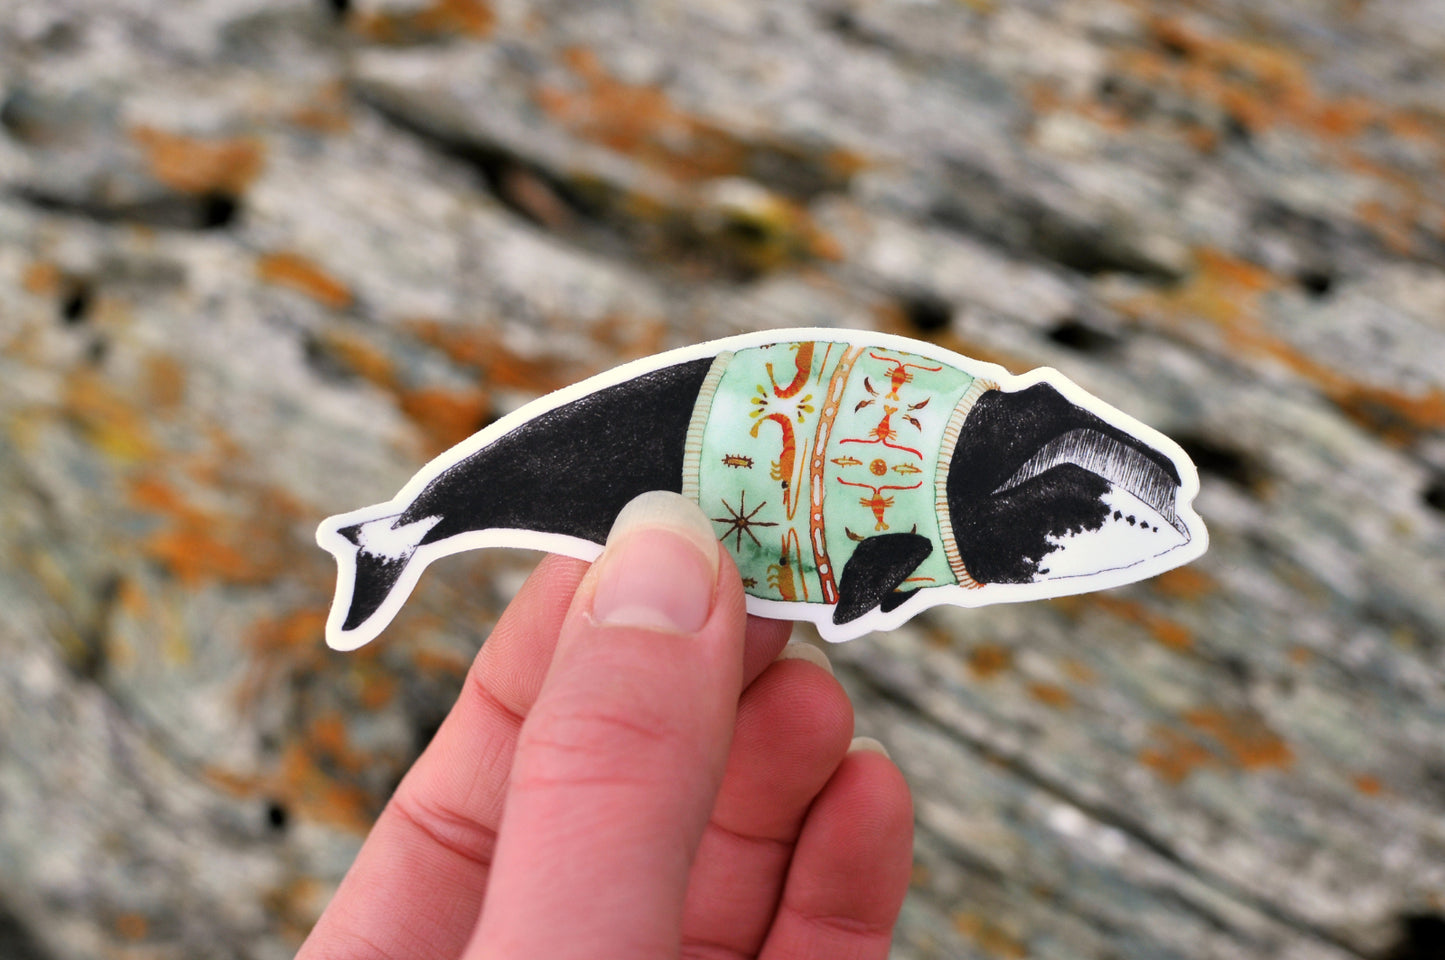 Sweater Weather Bowhead Whale sticker